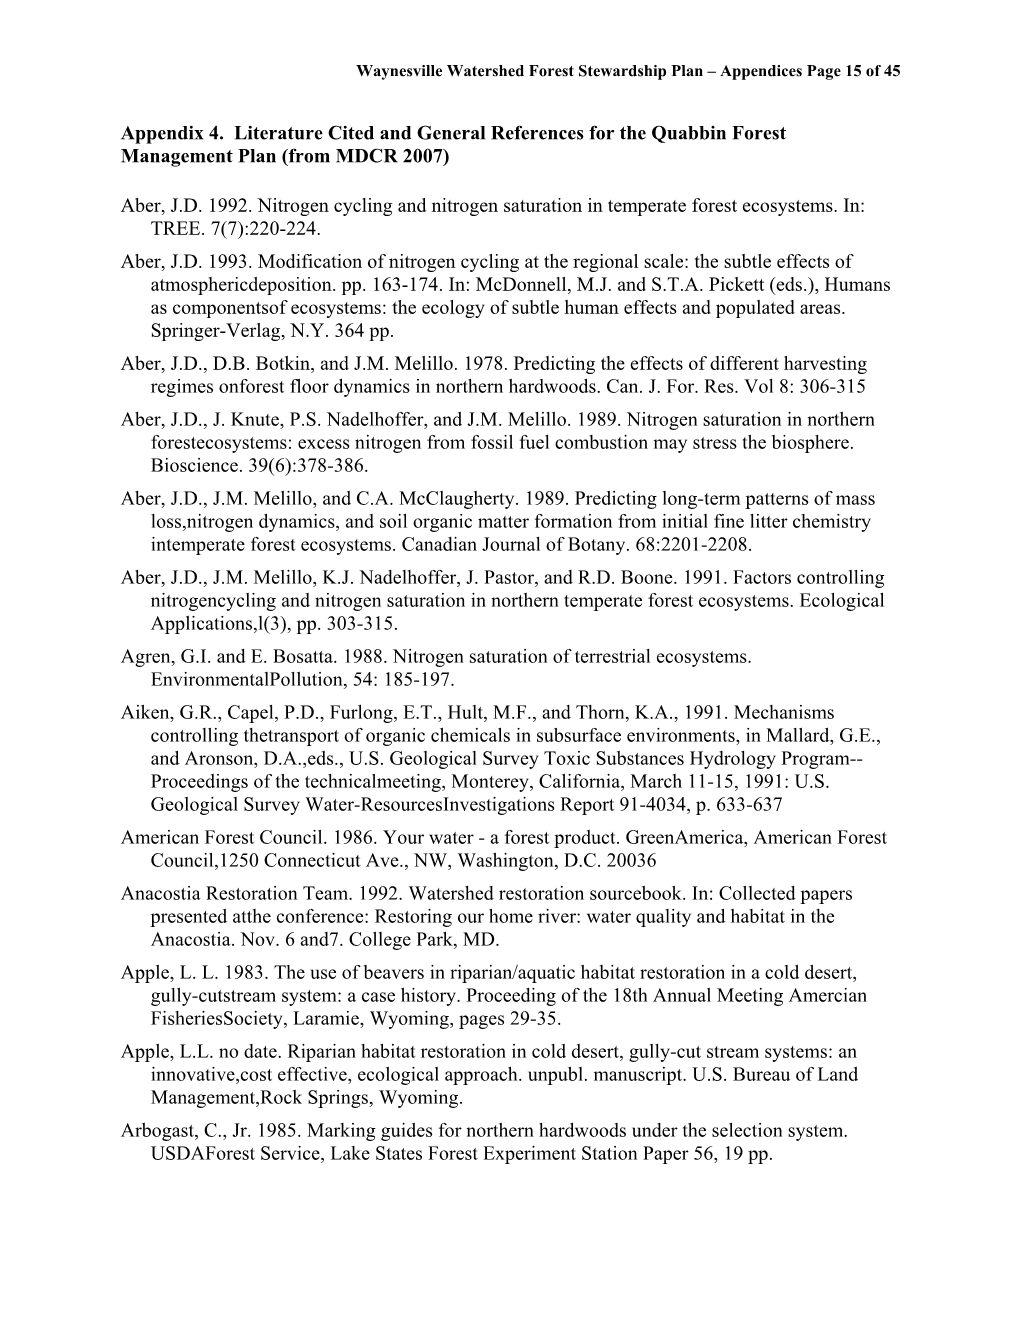 Appendix 4. Literature Cited and General References for the Quabbin Forest Management Plan (From MDCR 2007)